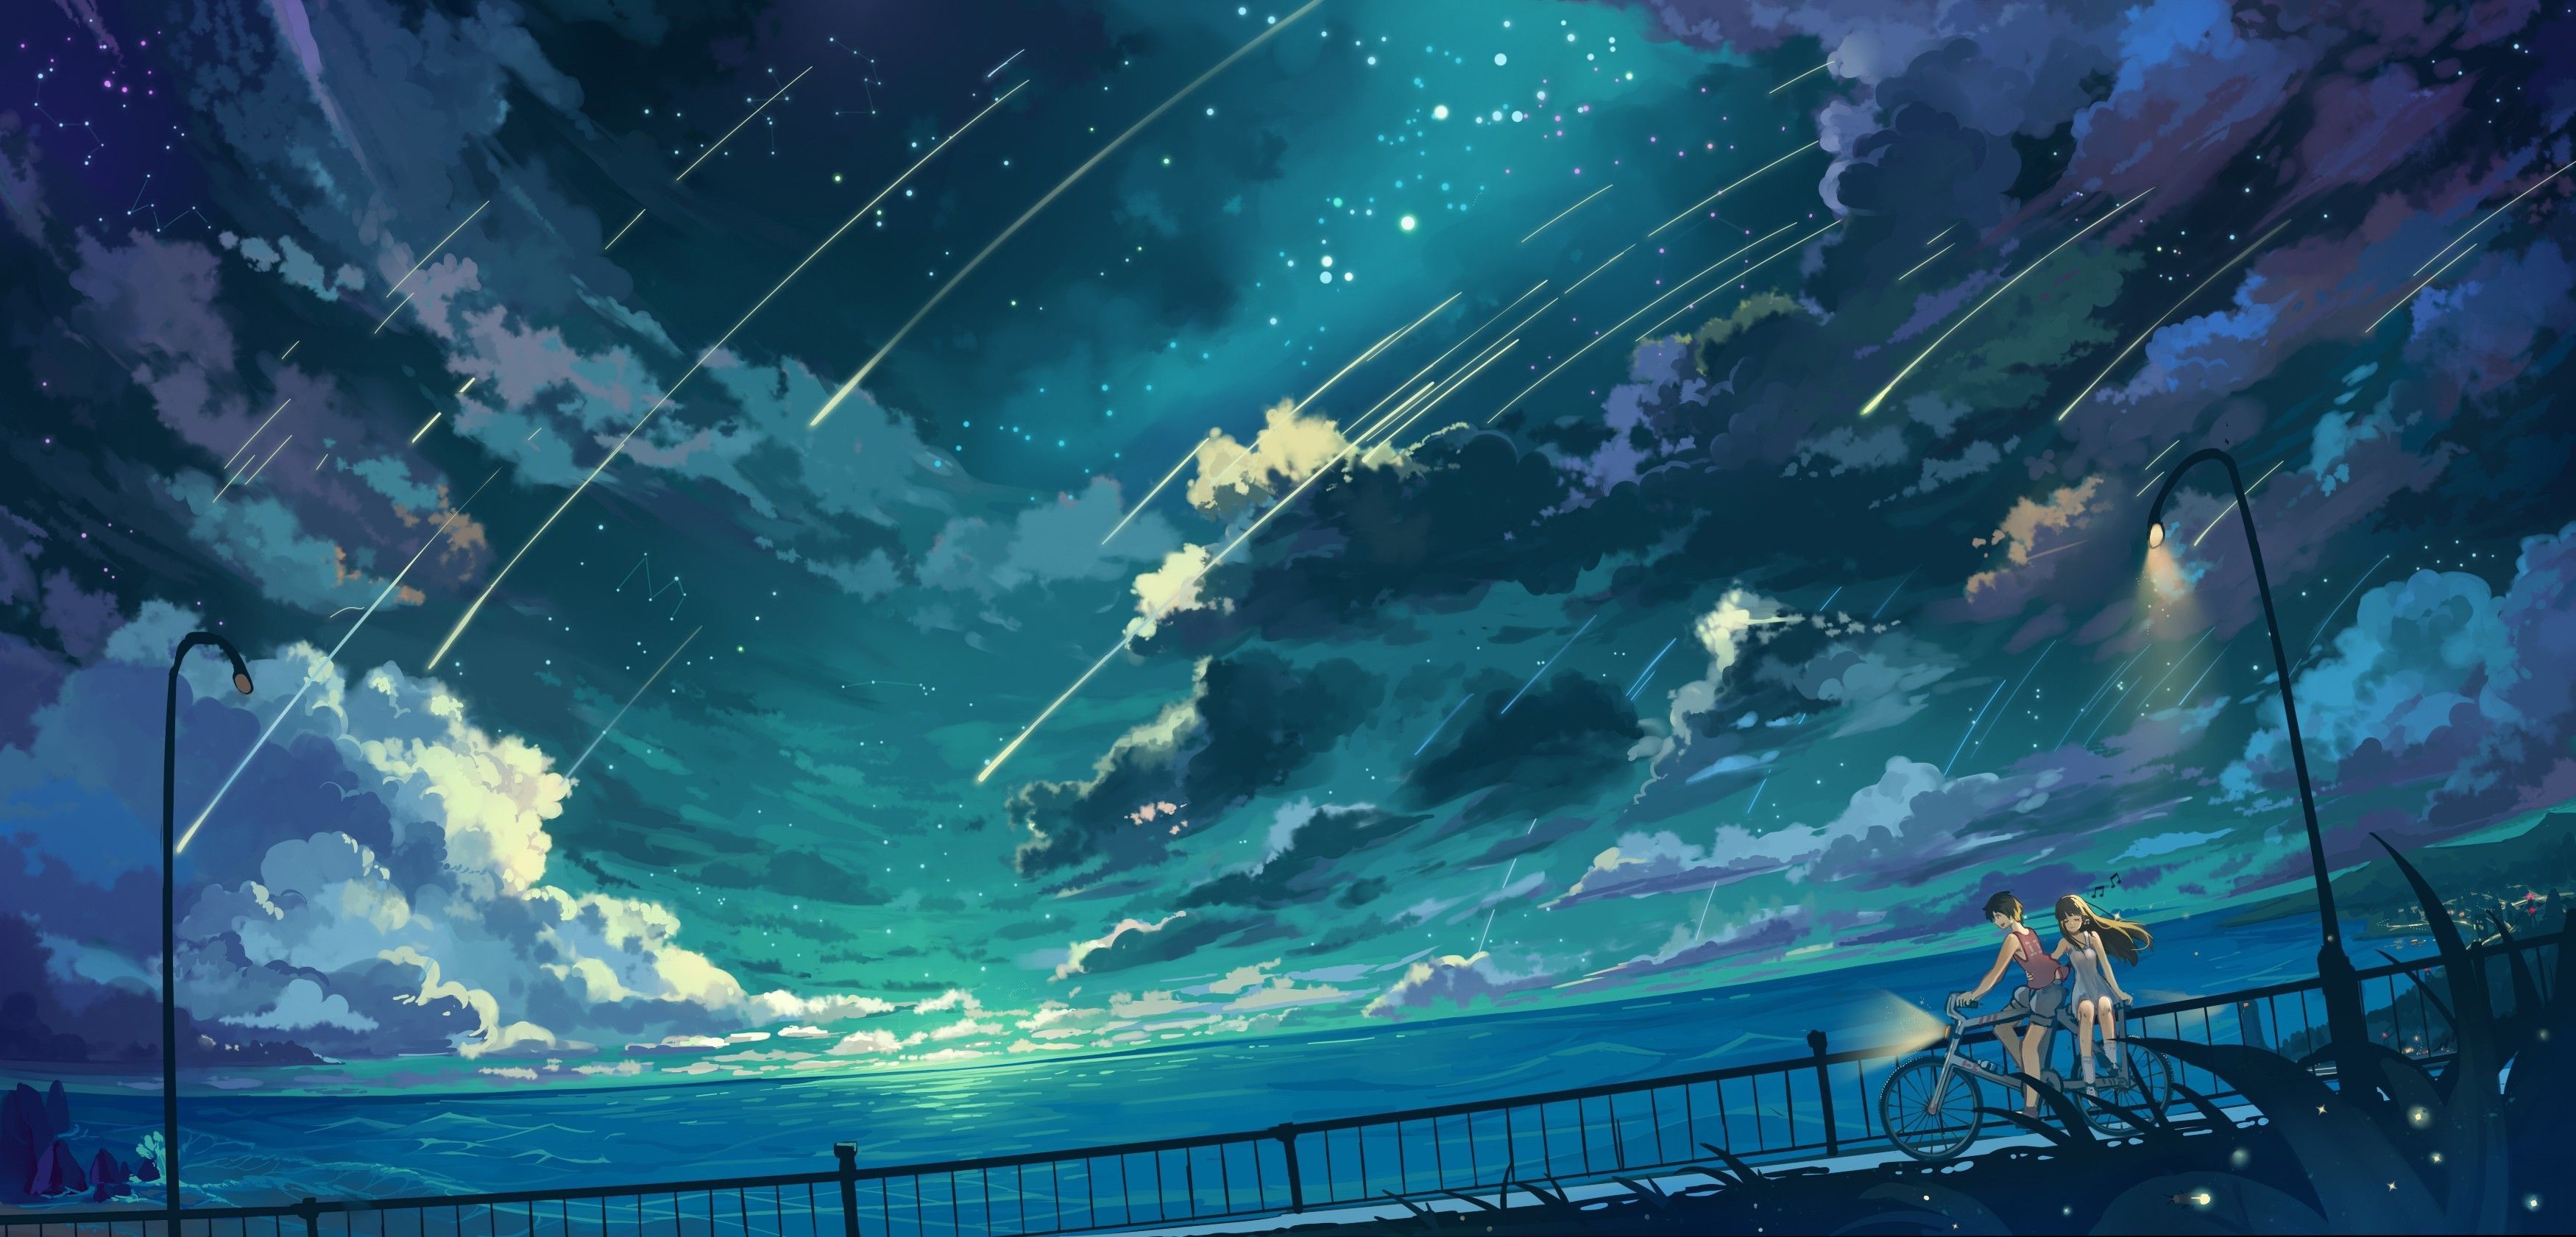 Res: 3500x HD Wallpaper. Background Image. Anime Original. Anime scenery, Scenery wallpaper, Anime scenery wallpaper